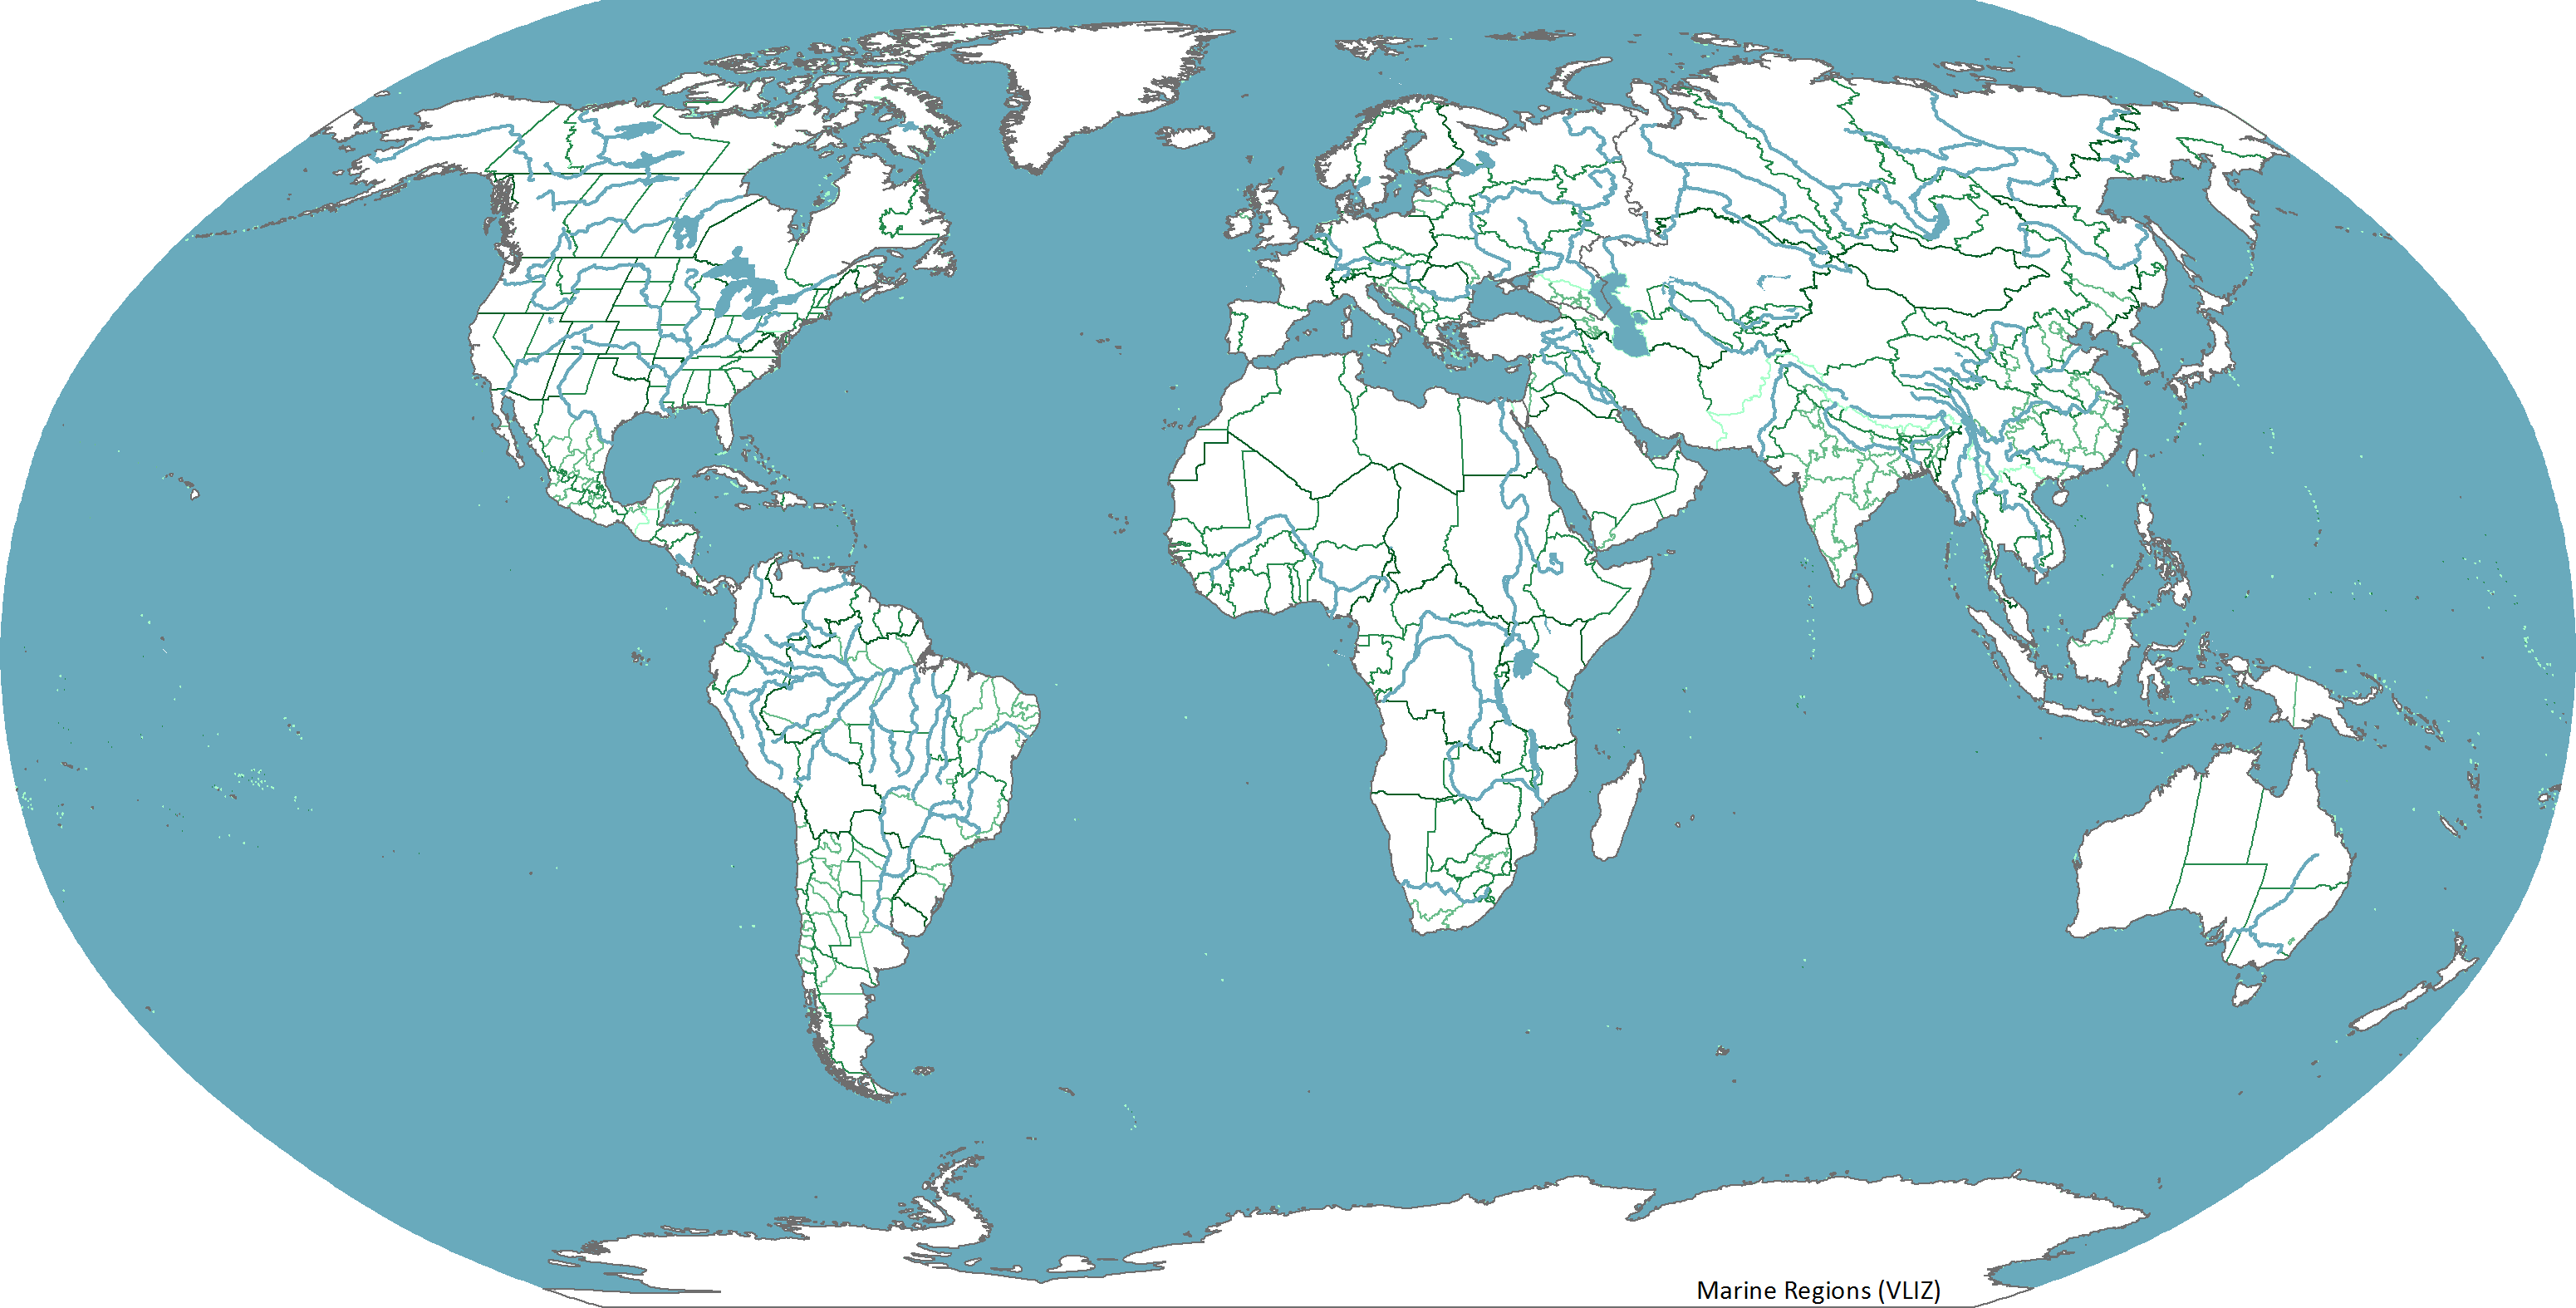 TDWG Geography shapefiles